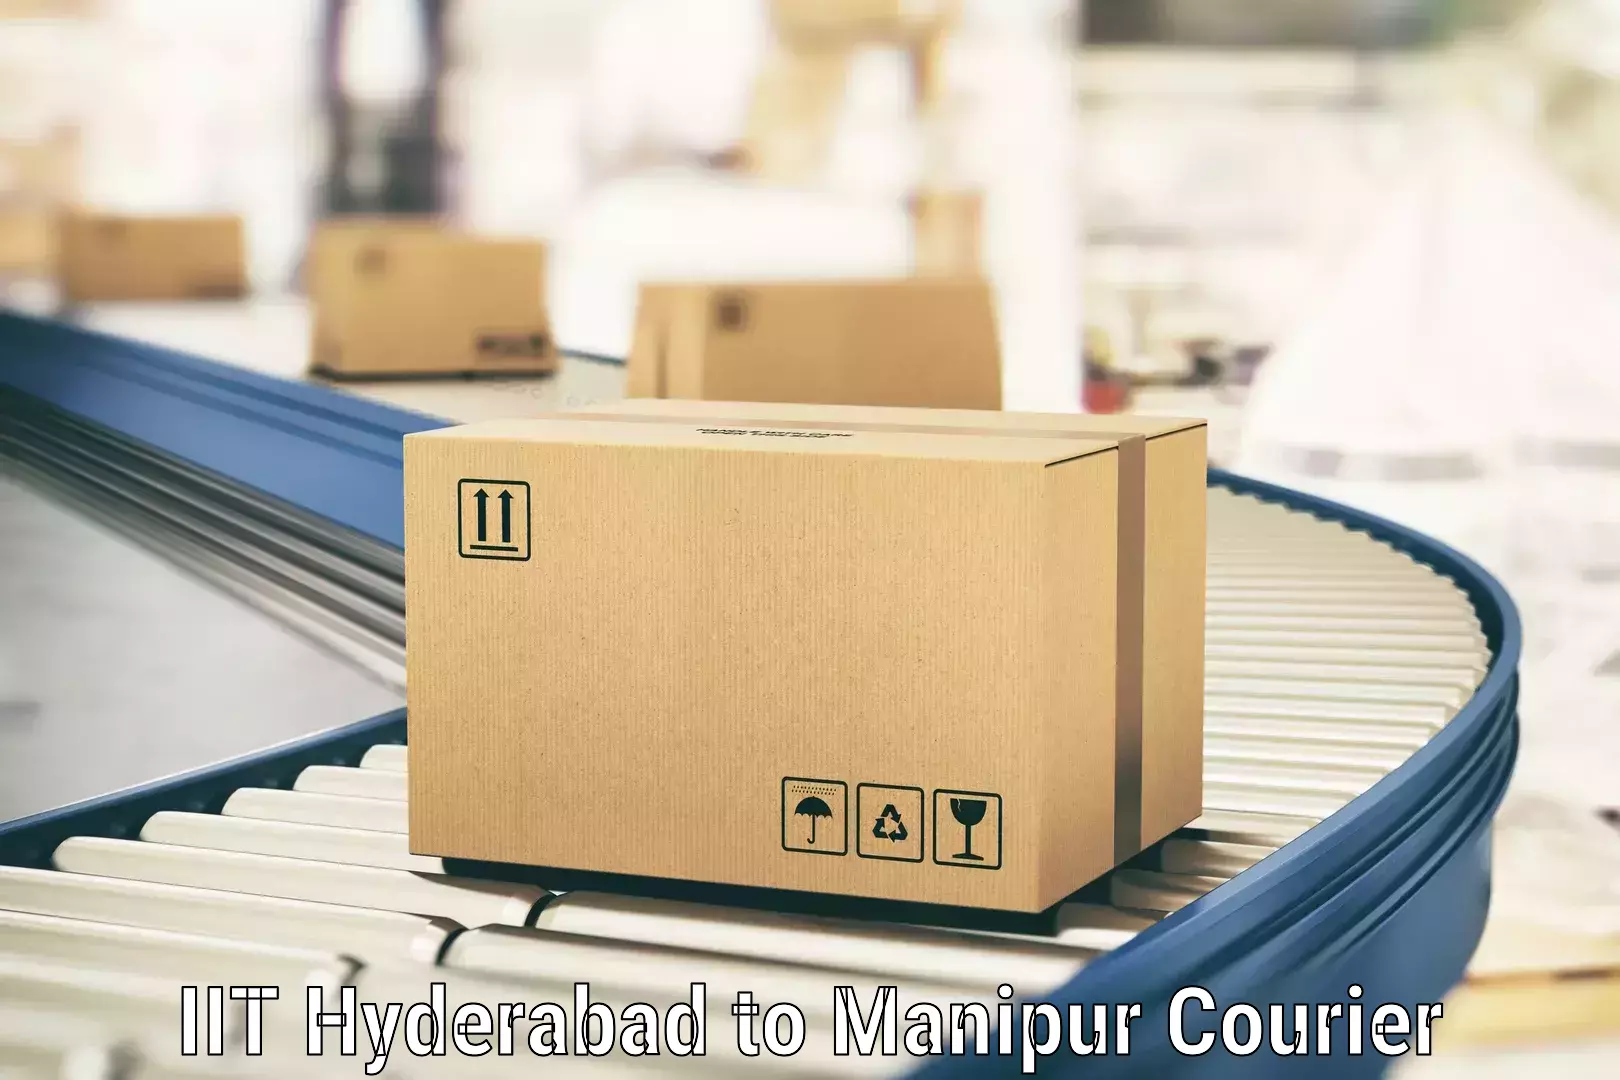 Sustainable shipping practices IIT Hyderabad to Manipur